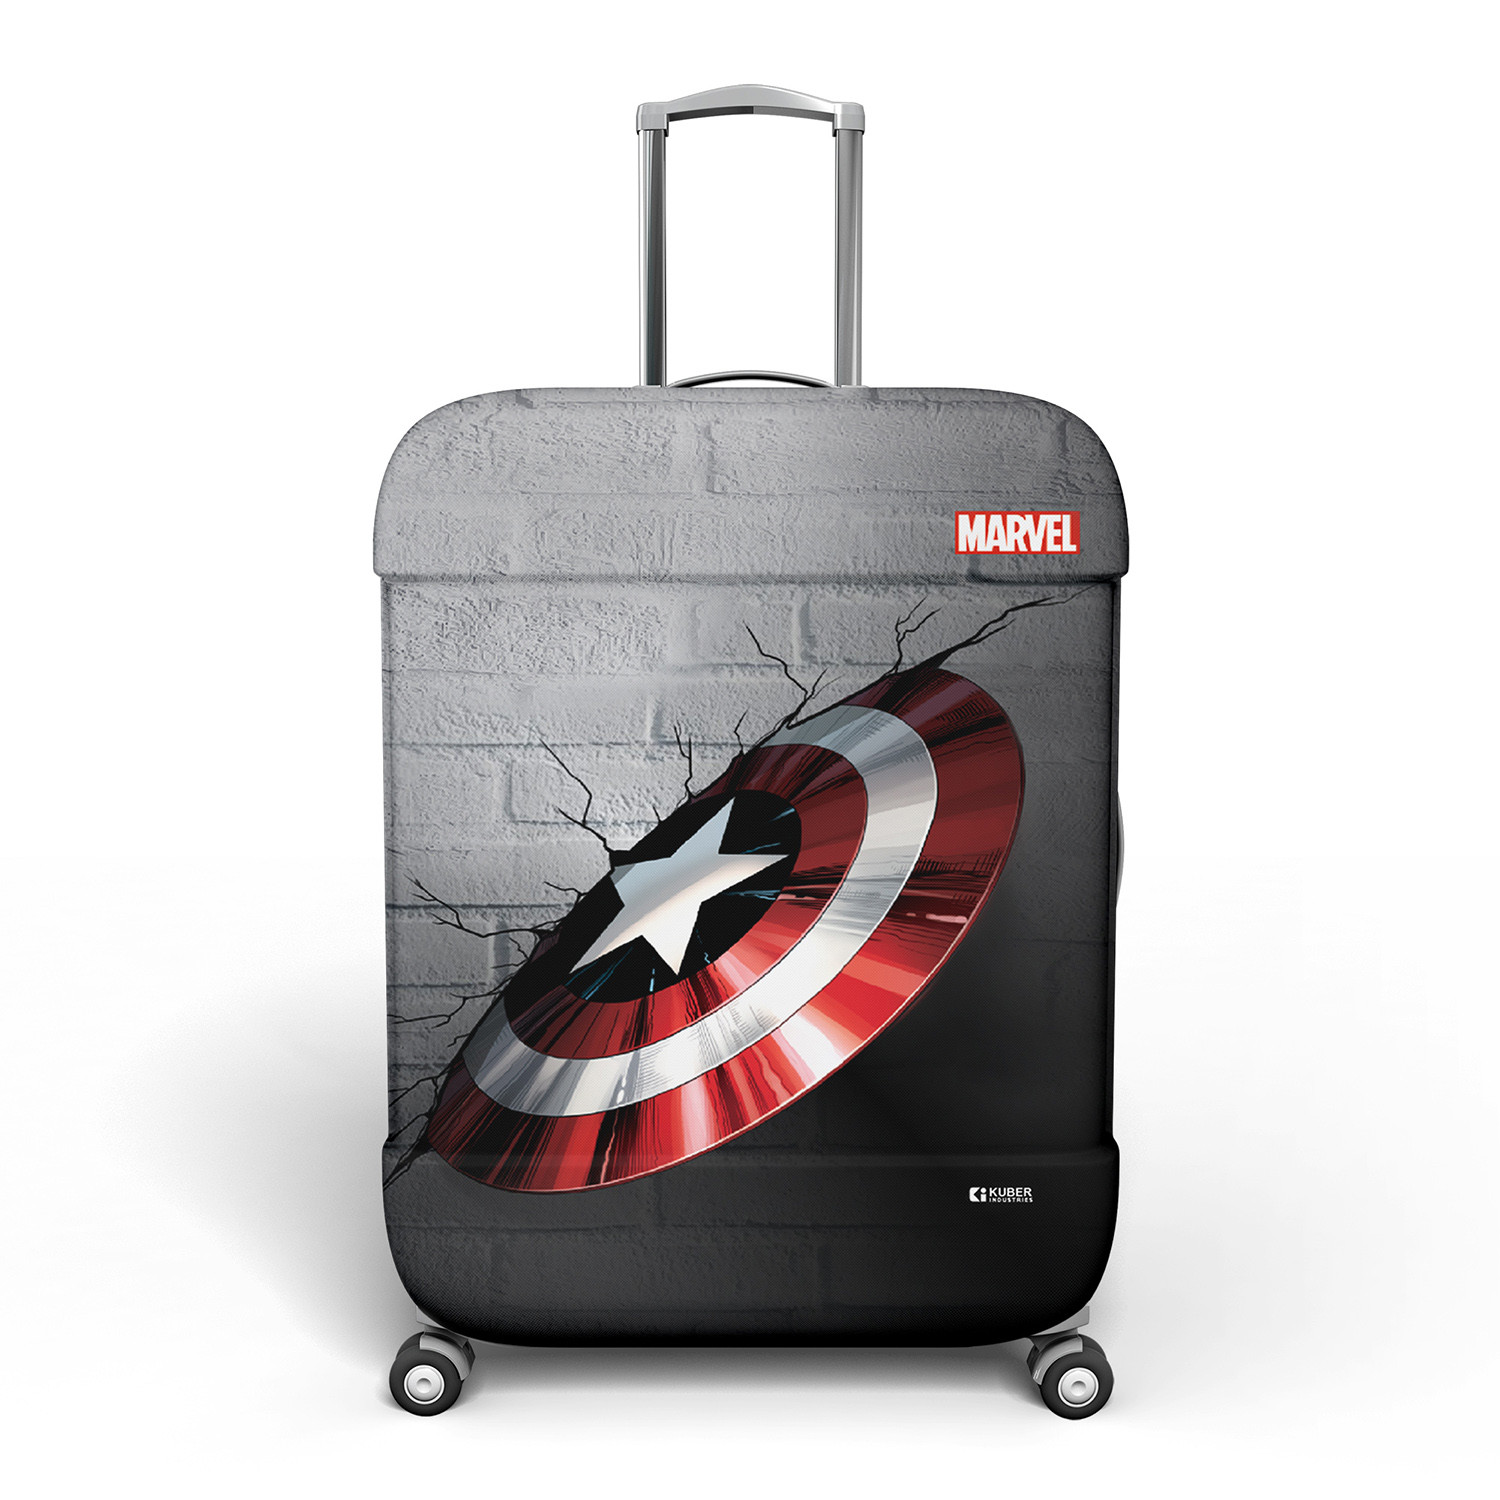 Kuber Industries Marvel Captain America Shield Luggage Cover|Polyester Travel Suitcase Cover|Washable|Stretchable Suitcase Protector|22-26 Inch|Medium (Gray)